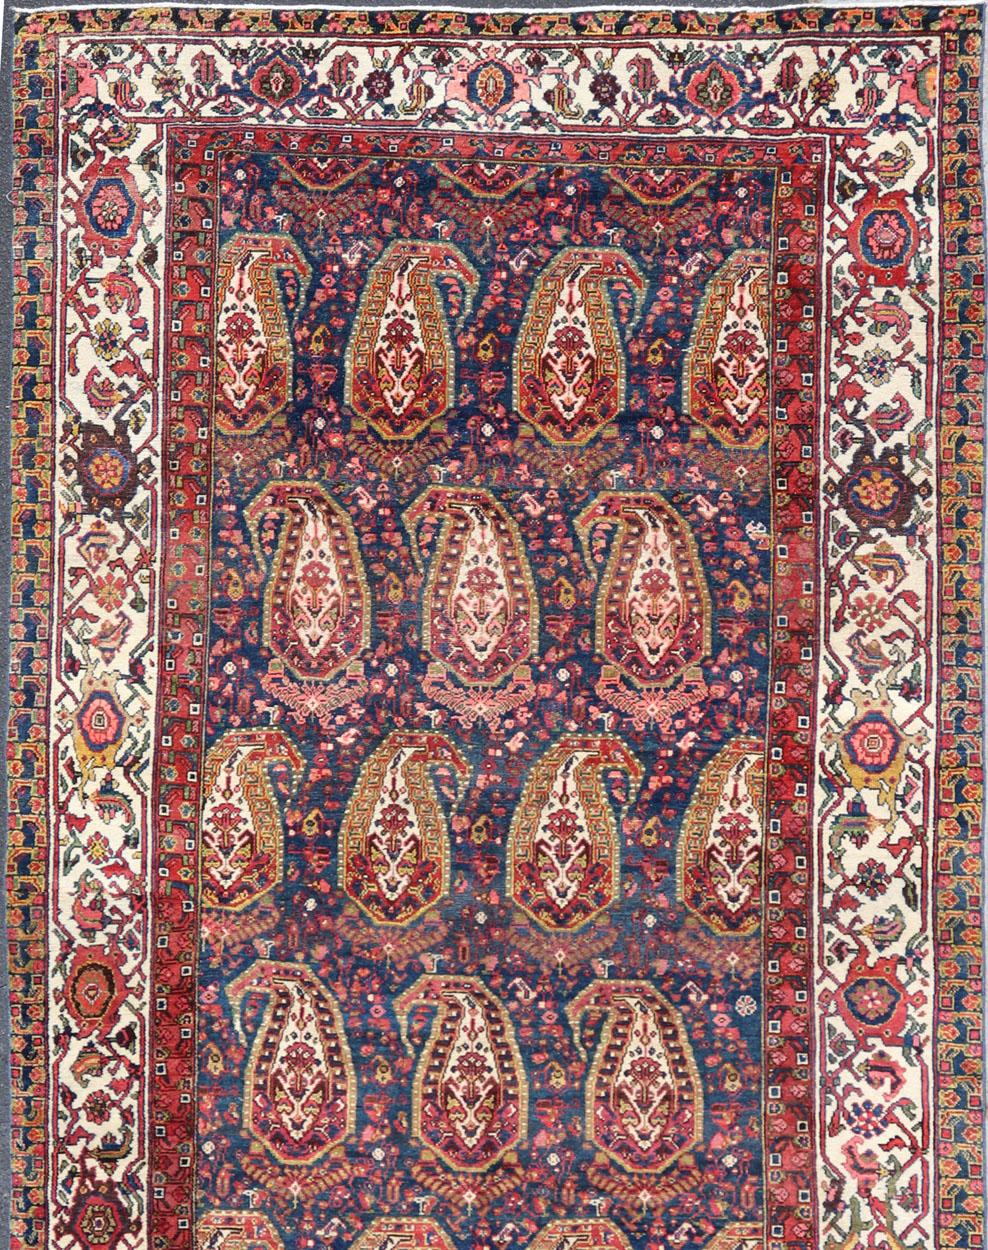 Wool Antique Persian Paisley Field Hamadan in Multi-Tiered Border in Red and Blue For Sale